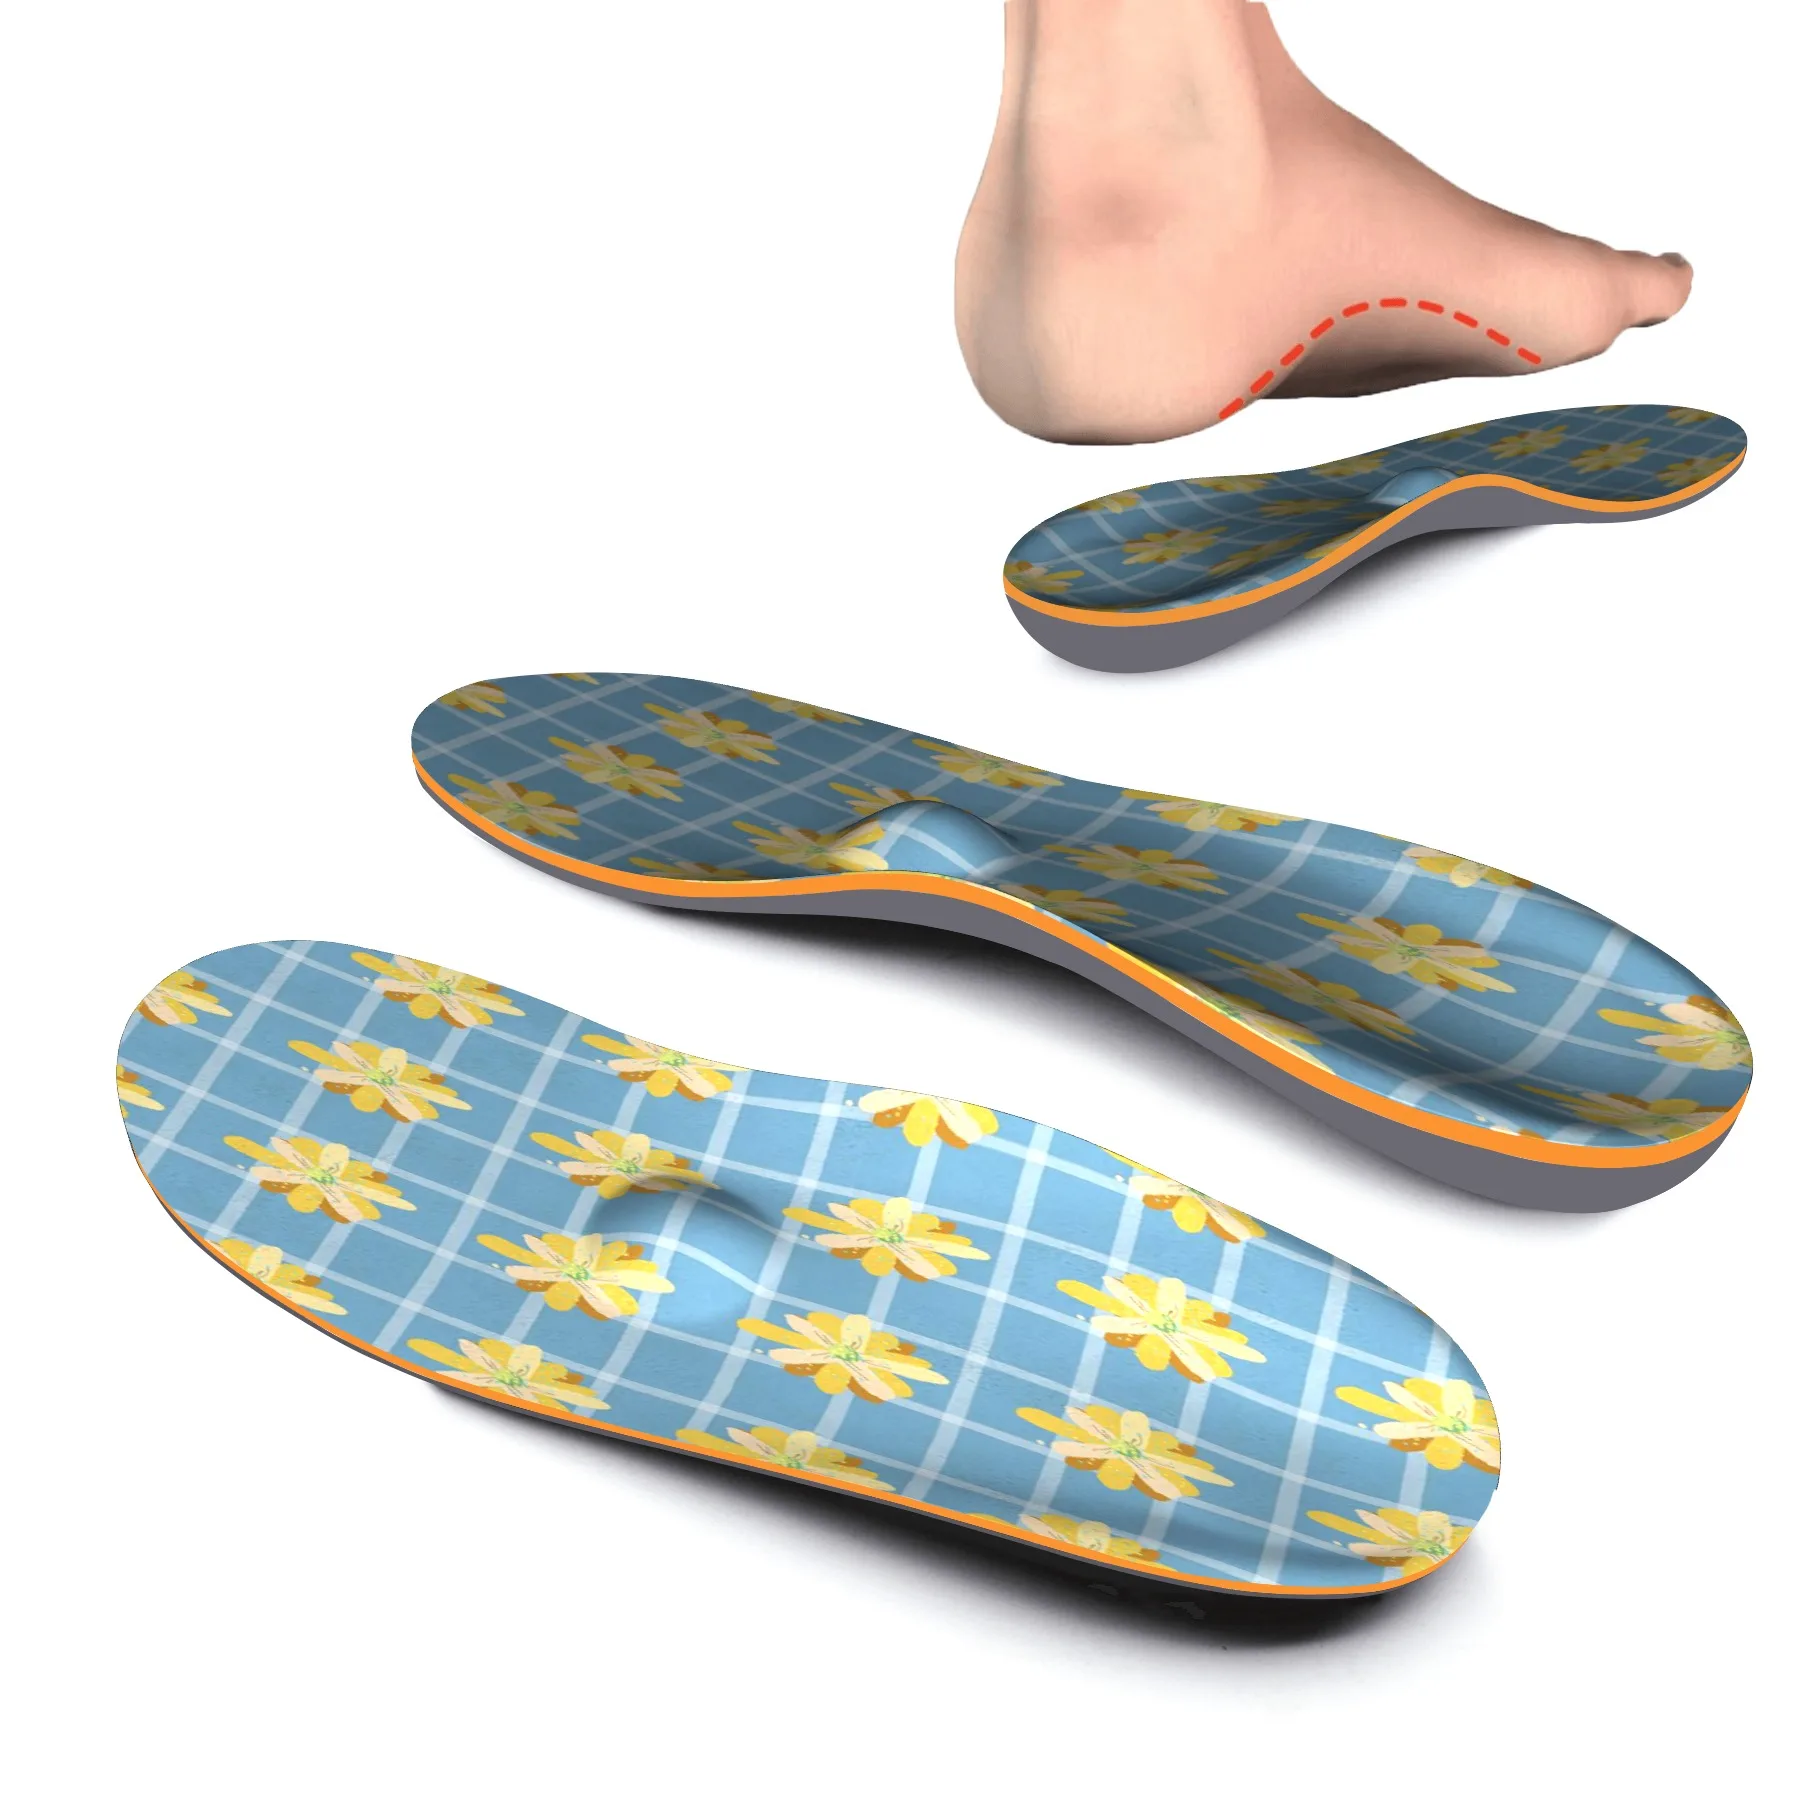 iFitna Flower Design Orthopedic Inserts with Arch Support Insoles Relief Foot Pain for Plantar Fasciitis,Running,Flat Feet